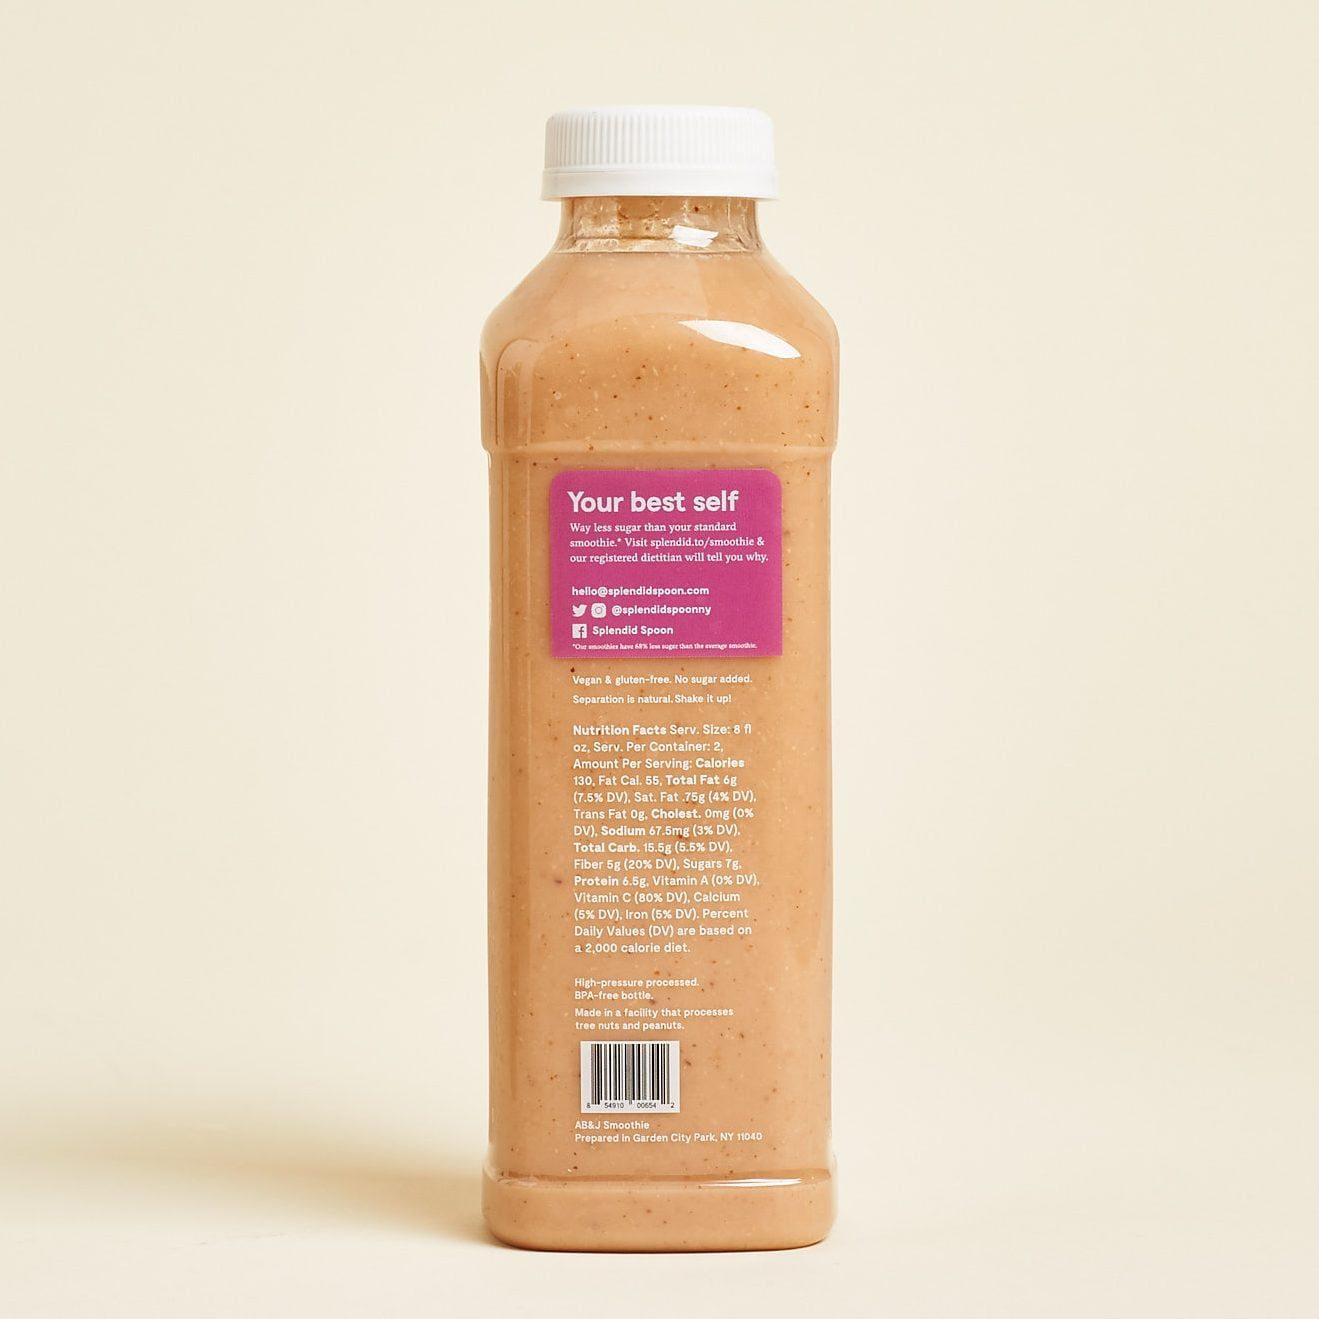 Splendid Spoon: Meal replacement smoothies brand. The plant-based drinks can be ordered on recurring subscription.